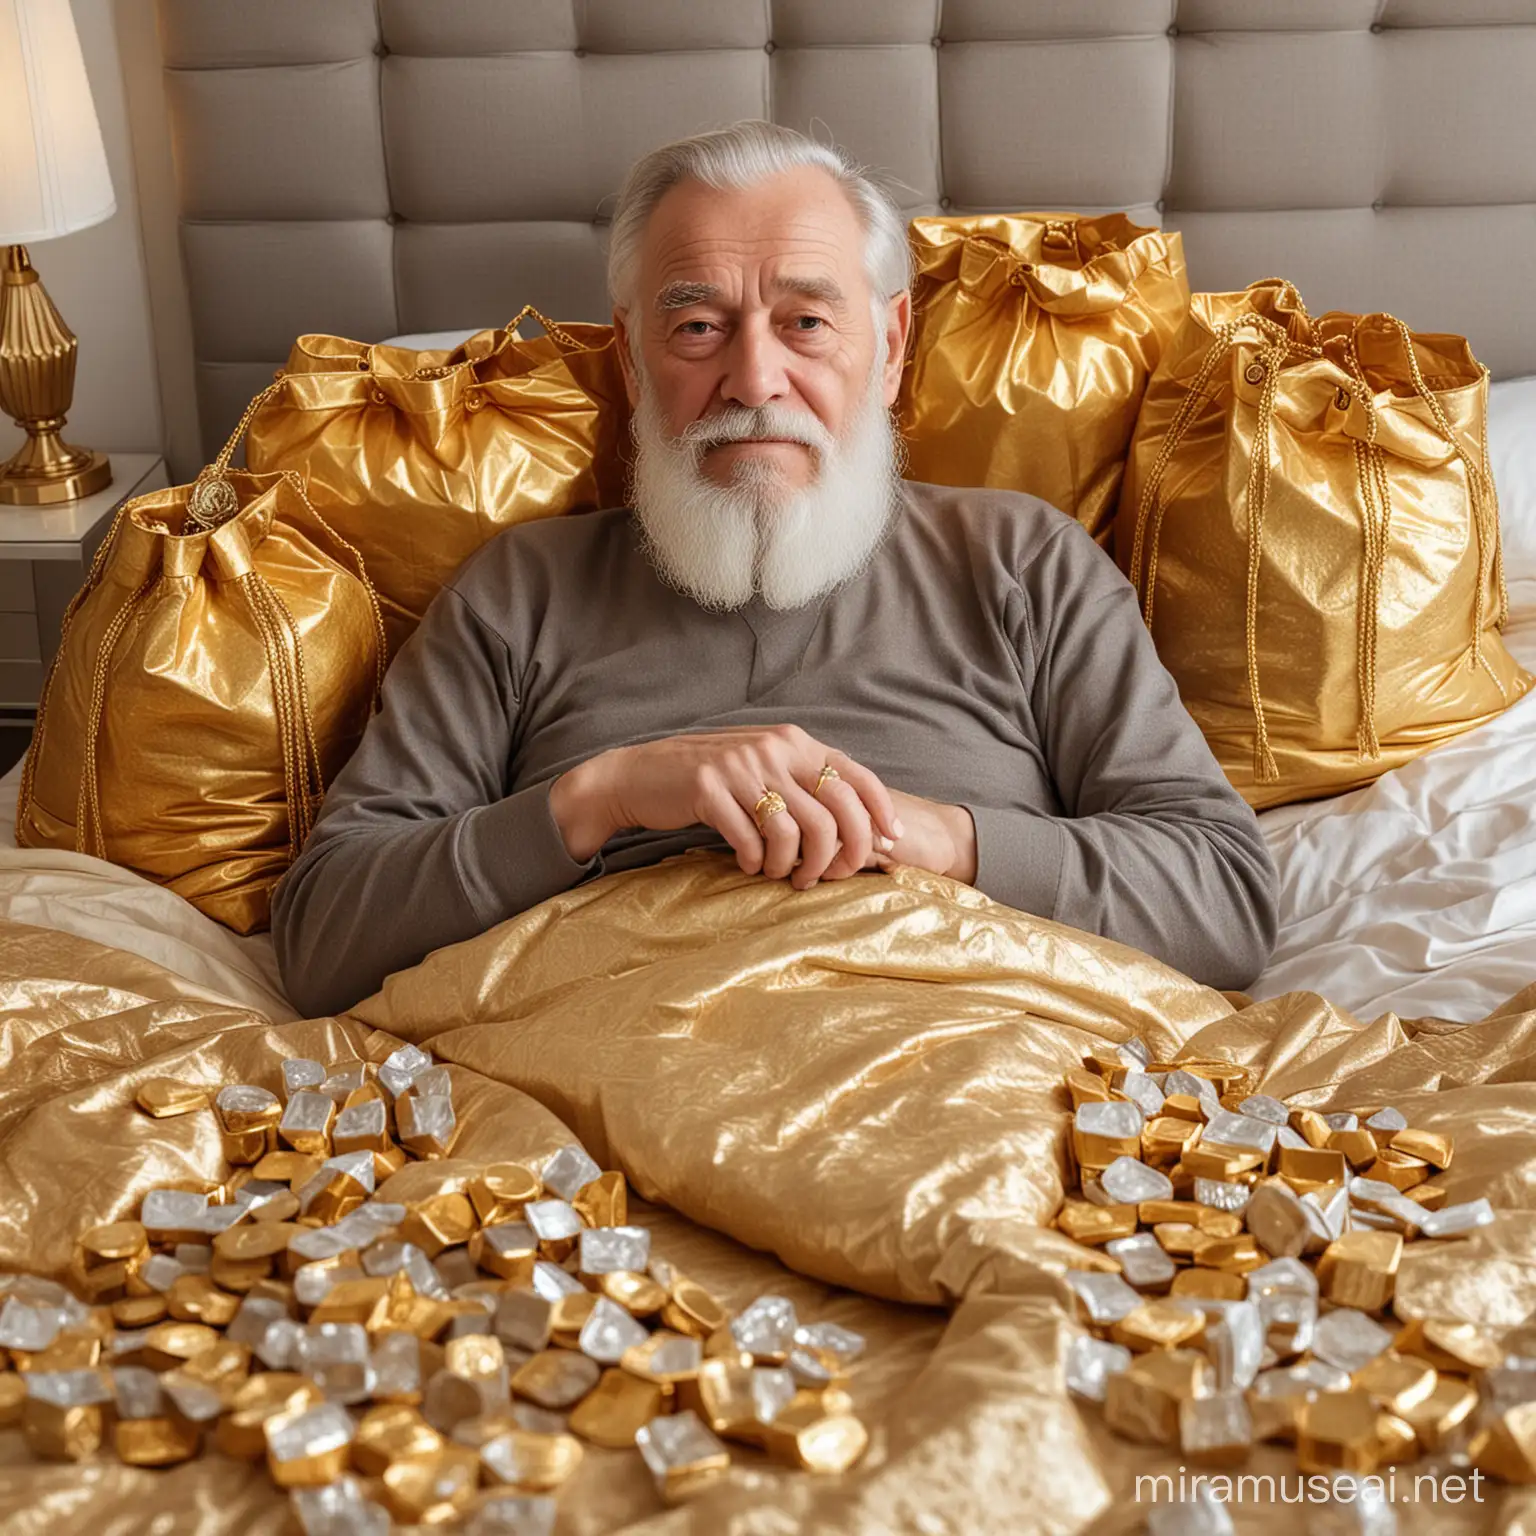 Old man, king of crypto, he lies on bed with gold in own apartment where all is crystal and very rich. There are 3 big bags with money